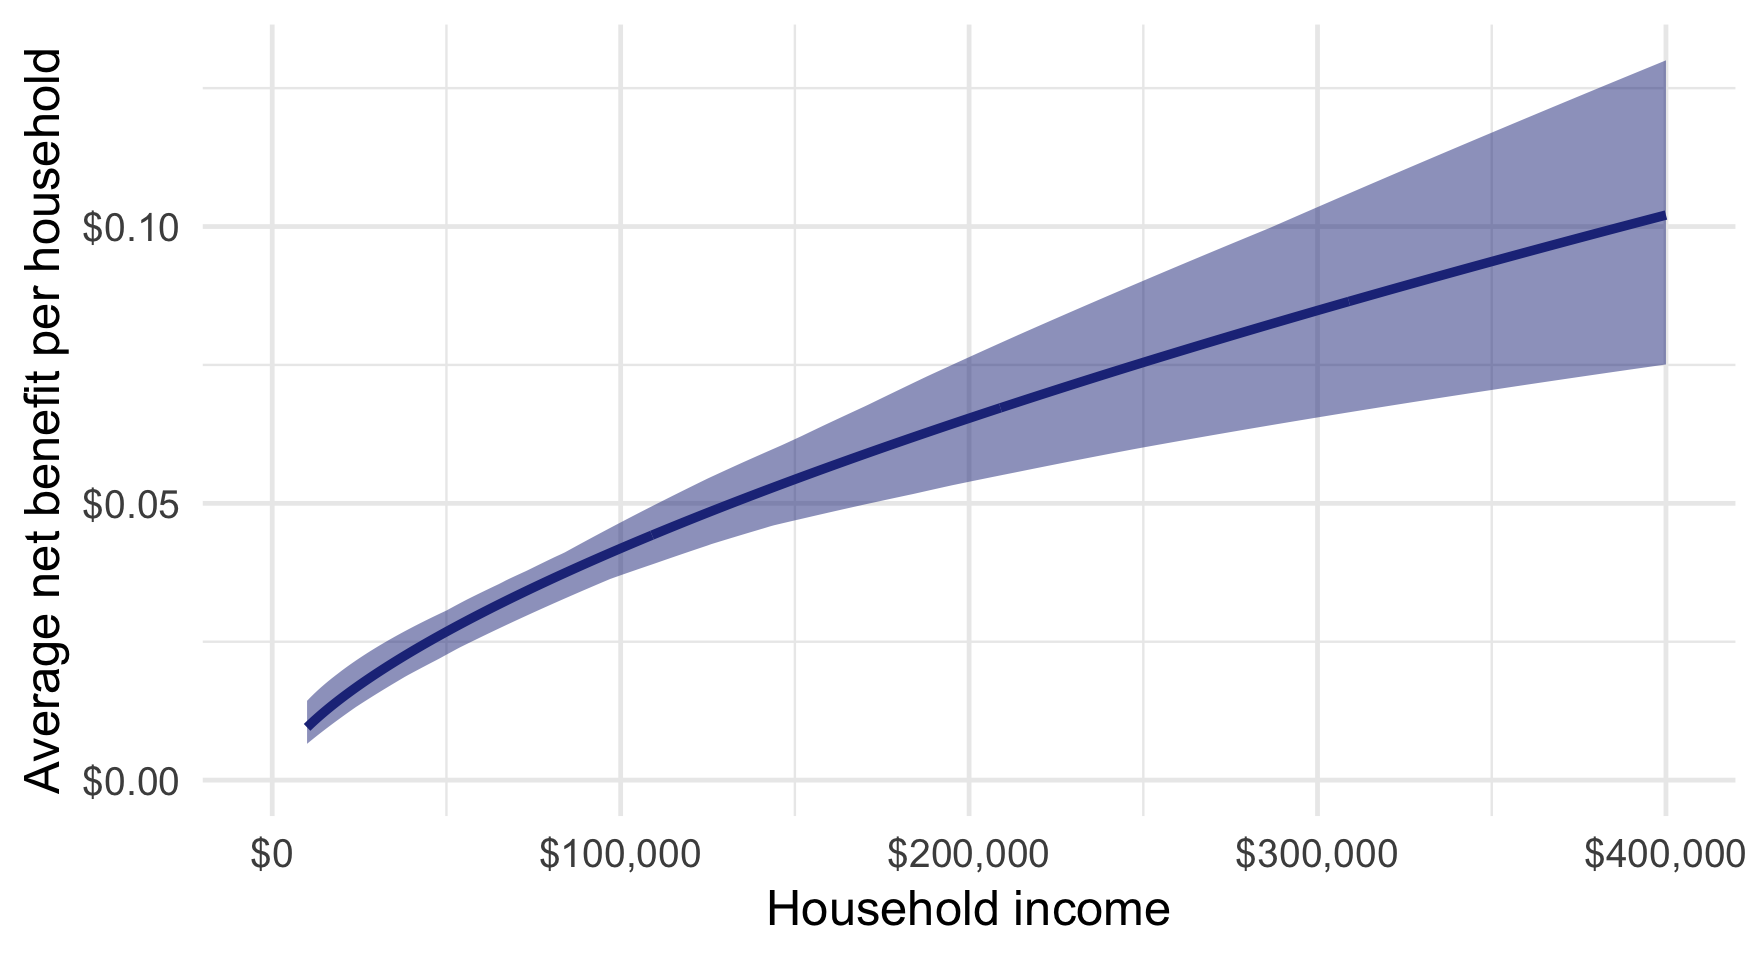 Net benefit per household, by income